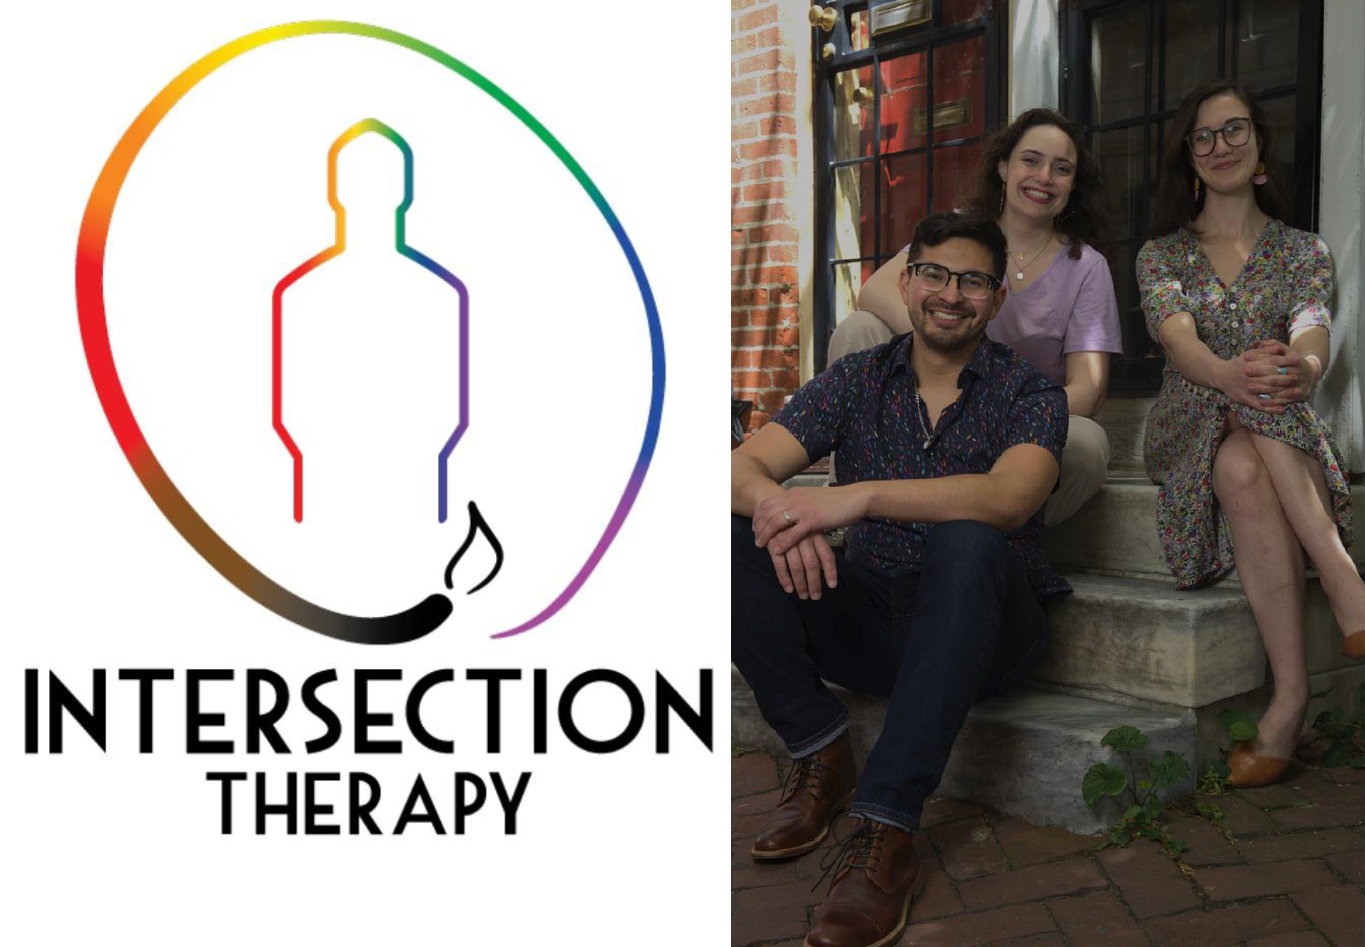 Gallery Photo of We are Intersection Therapy. 
Meeting your needs at every intersection in life! 
www.intersectiontherapy.com